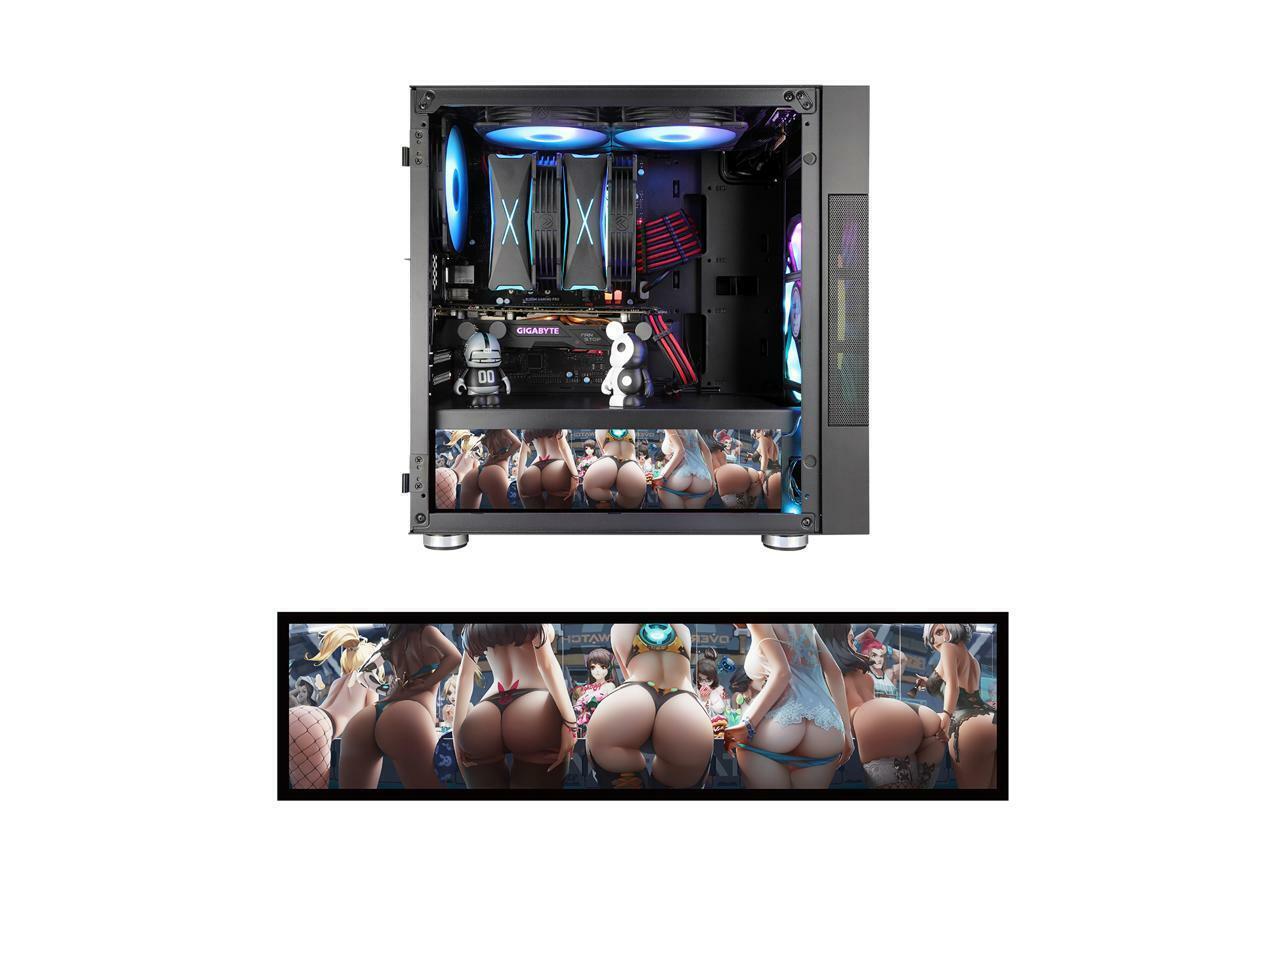 Vetroo Streetfight Computer Case Decor LED Horizontal Board Full HD Multi-Mode. Available Now for 18.99